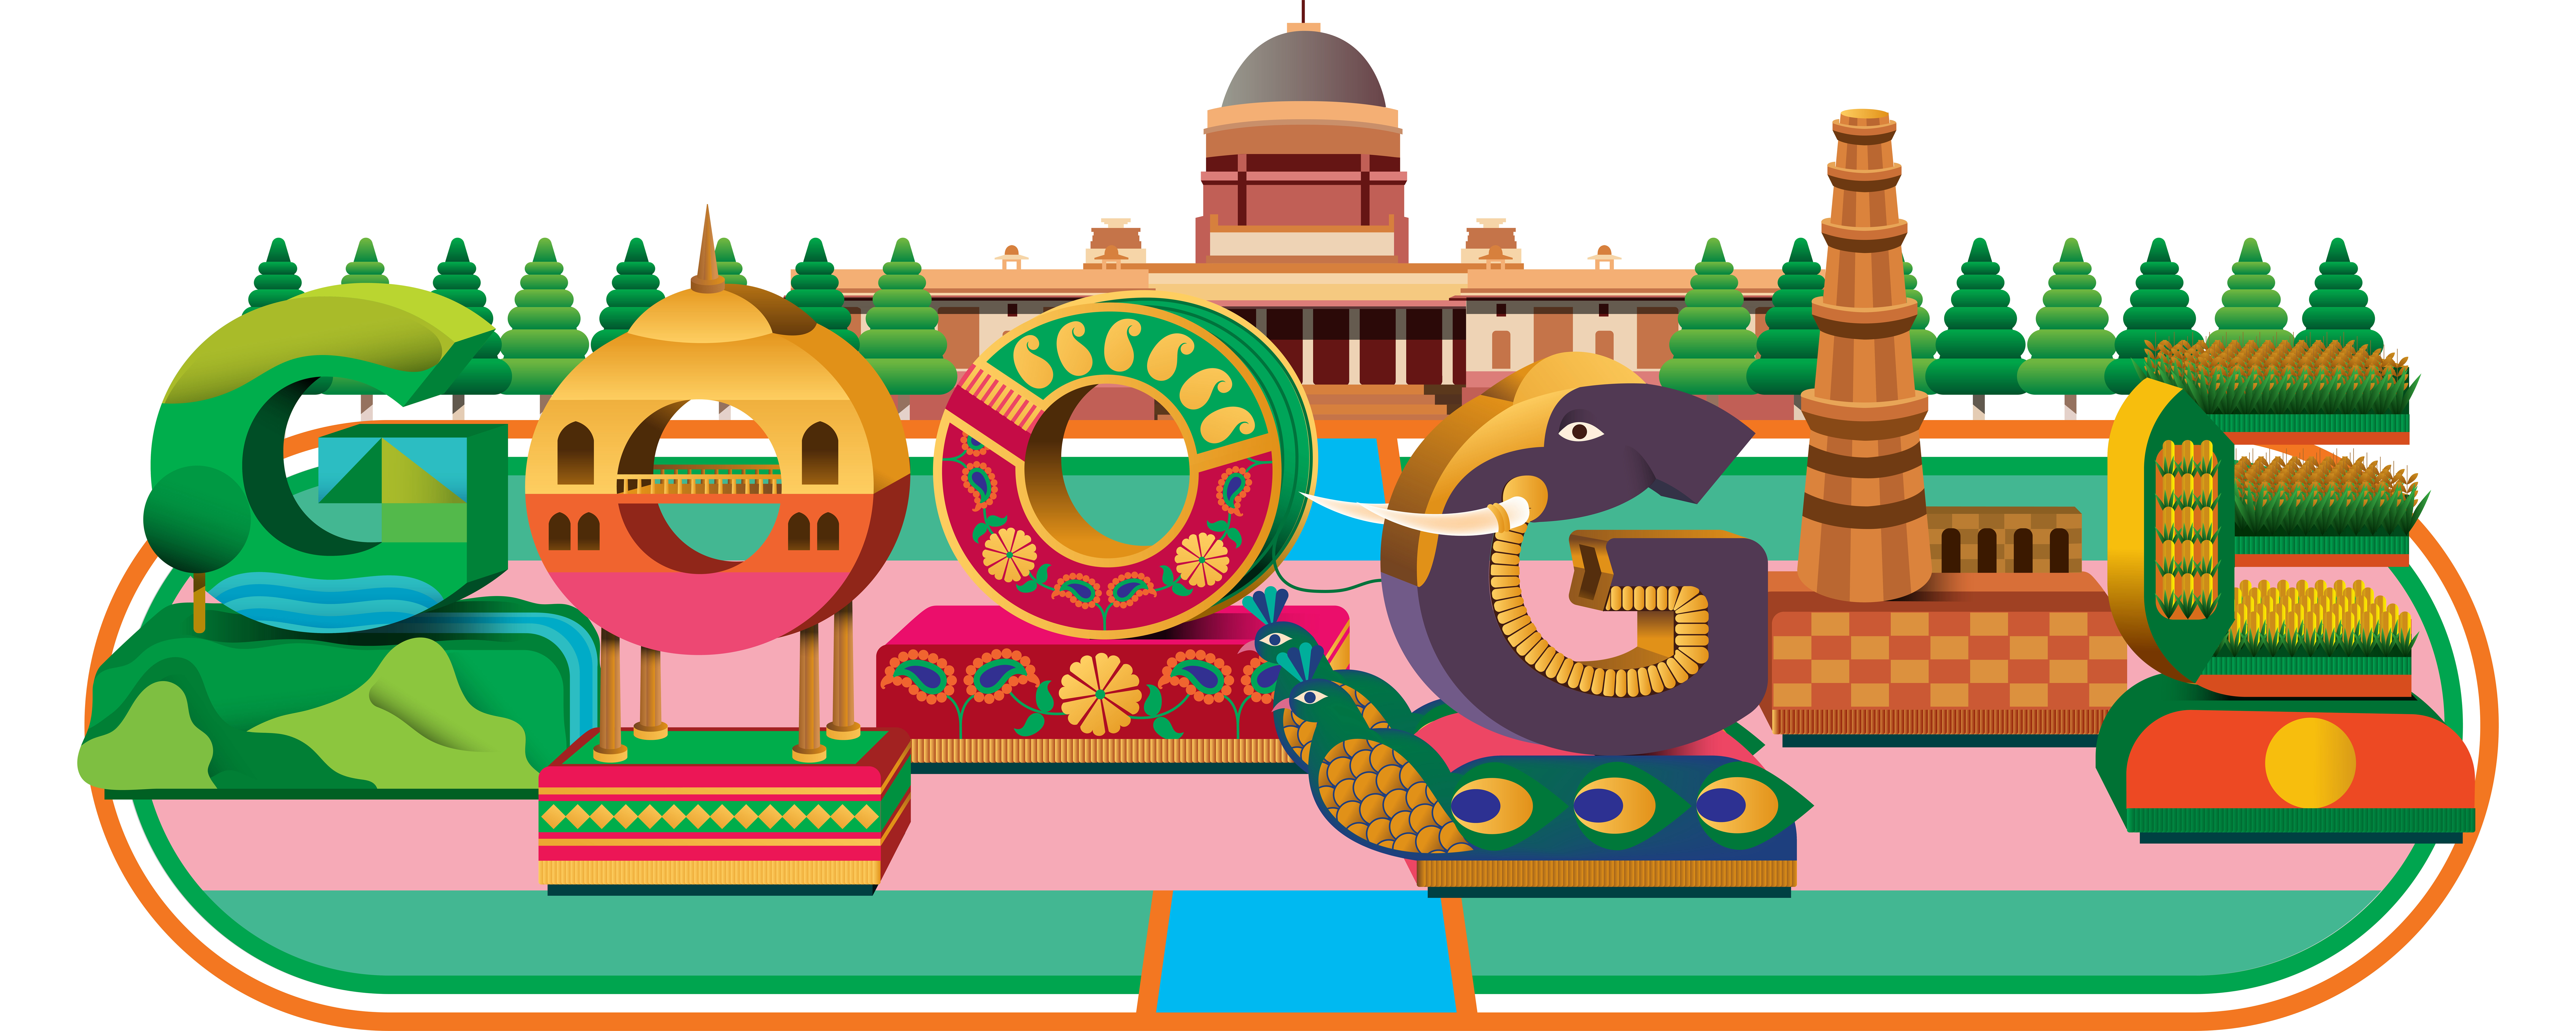 Illustration of a colorful Google Doodle designed by Reshidev RK for India’s Independence Day.